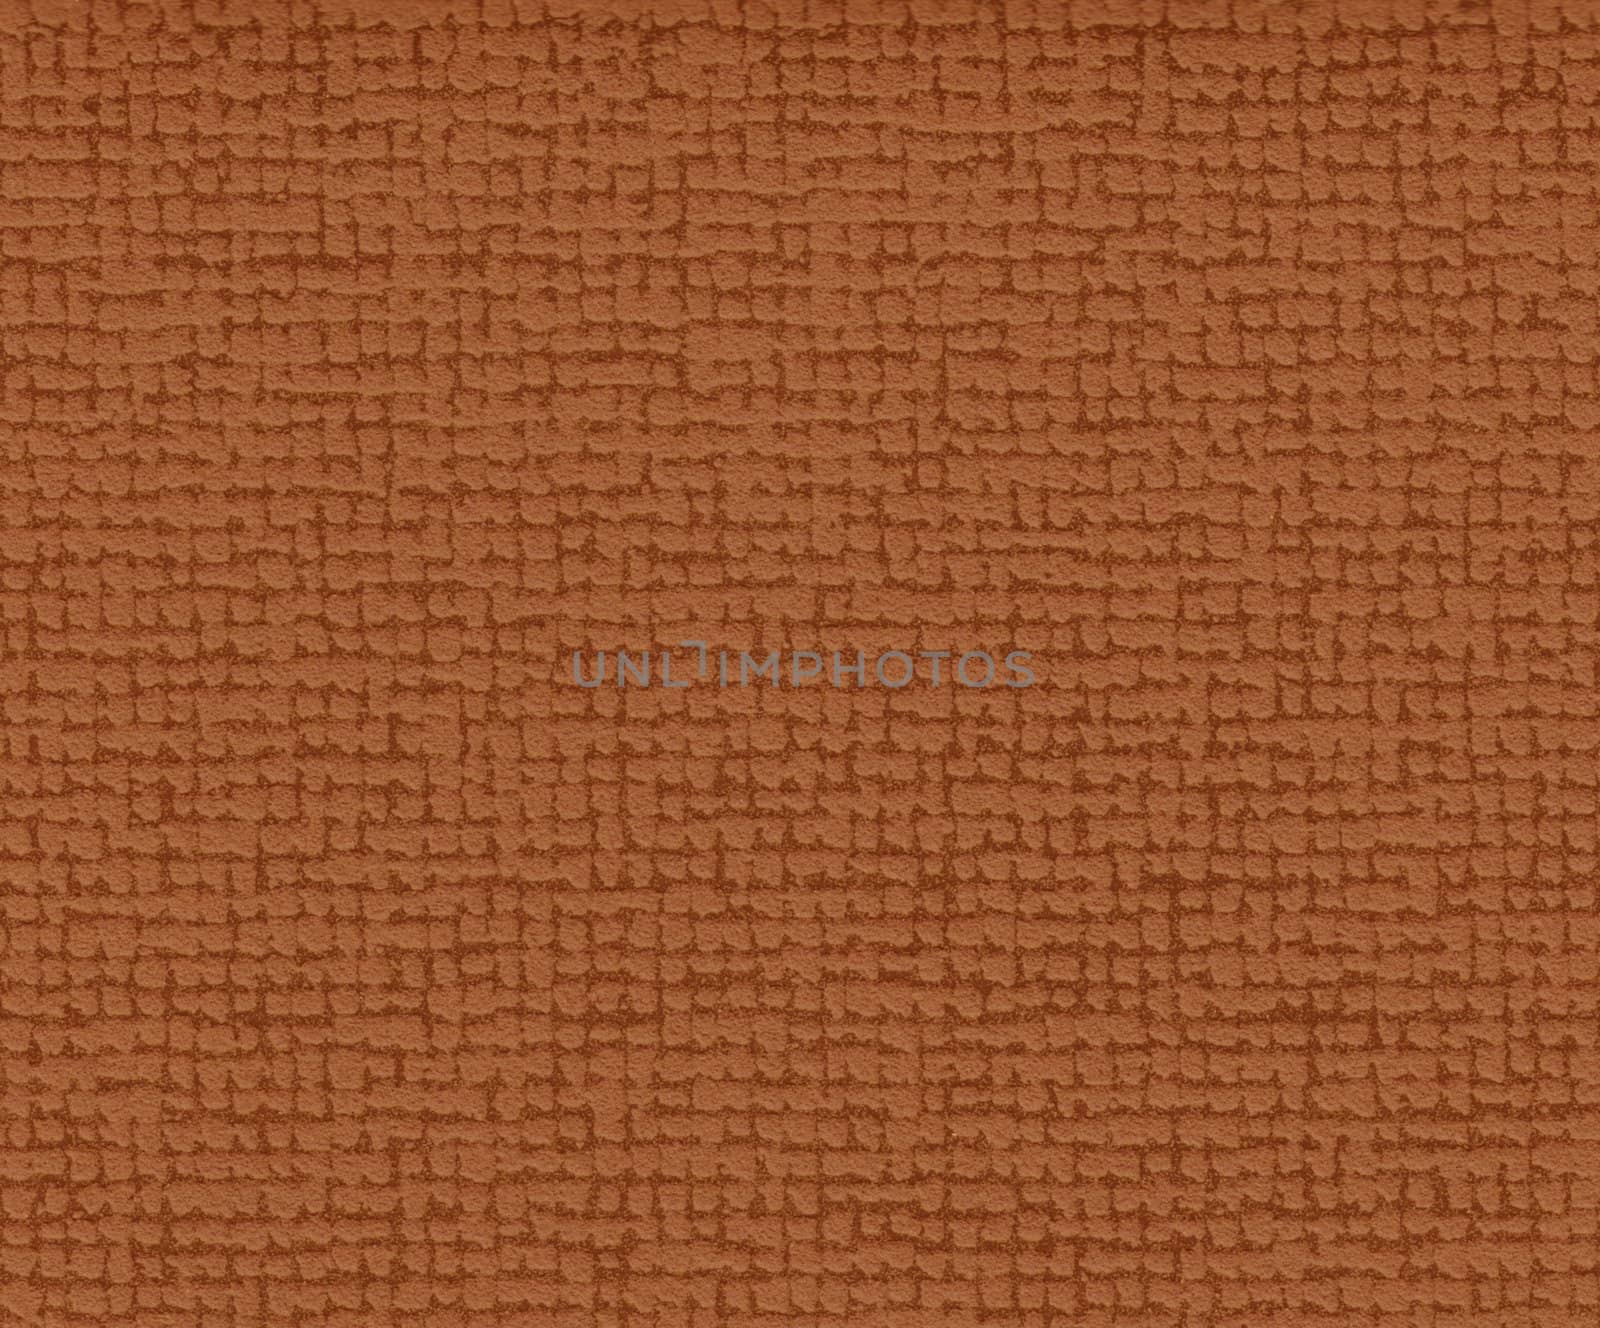 Brown fabric texture background by mg1408